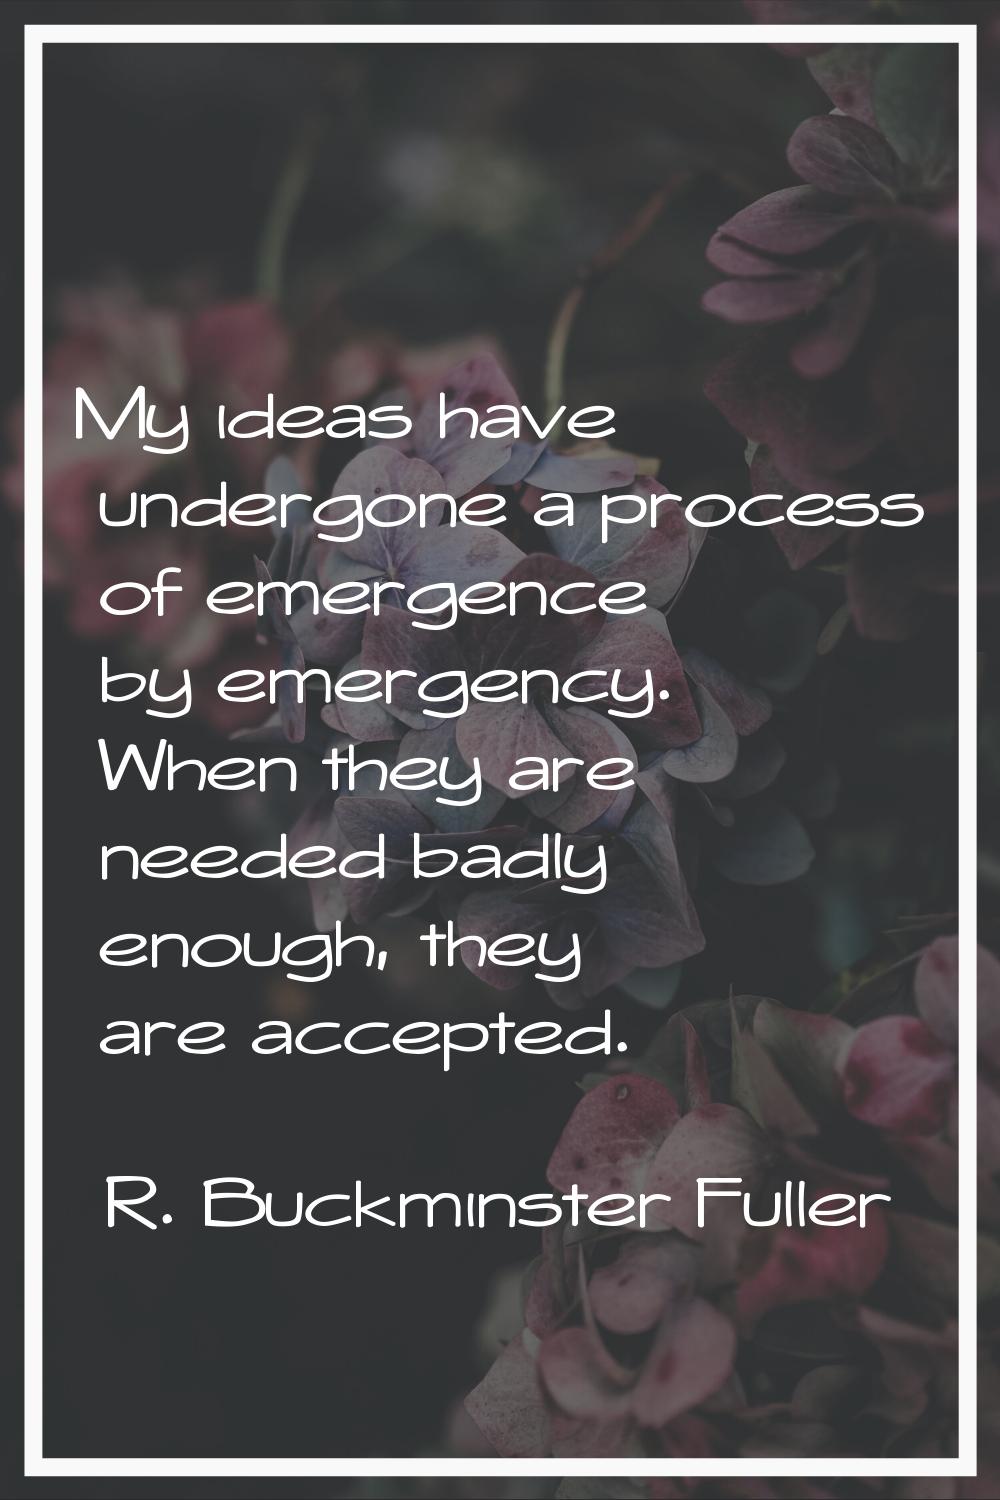 My ideas have undergone a process of emergence by emergency. When they are needed badly enough, the